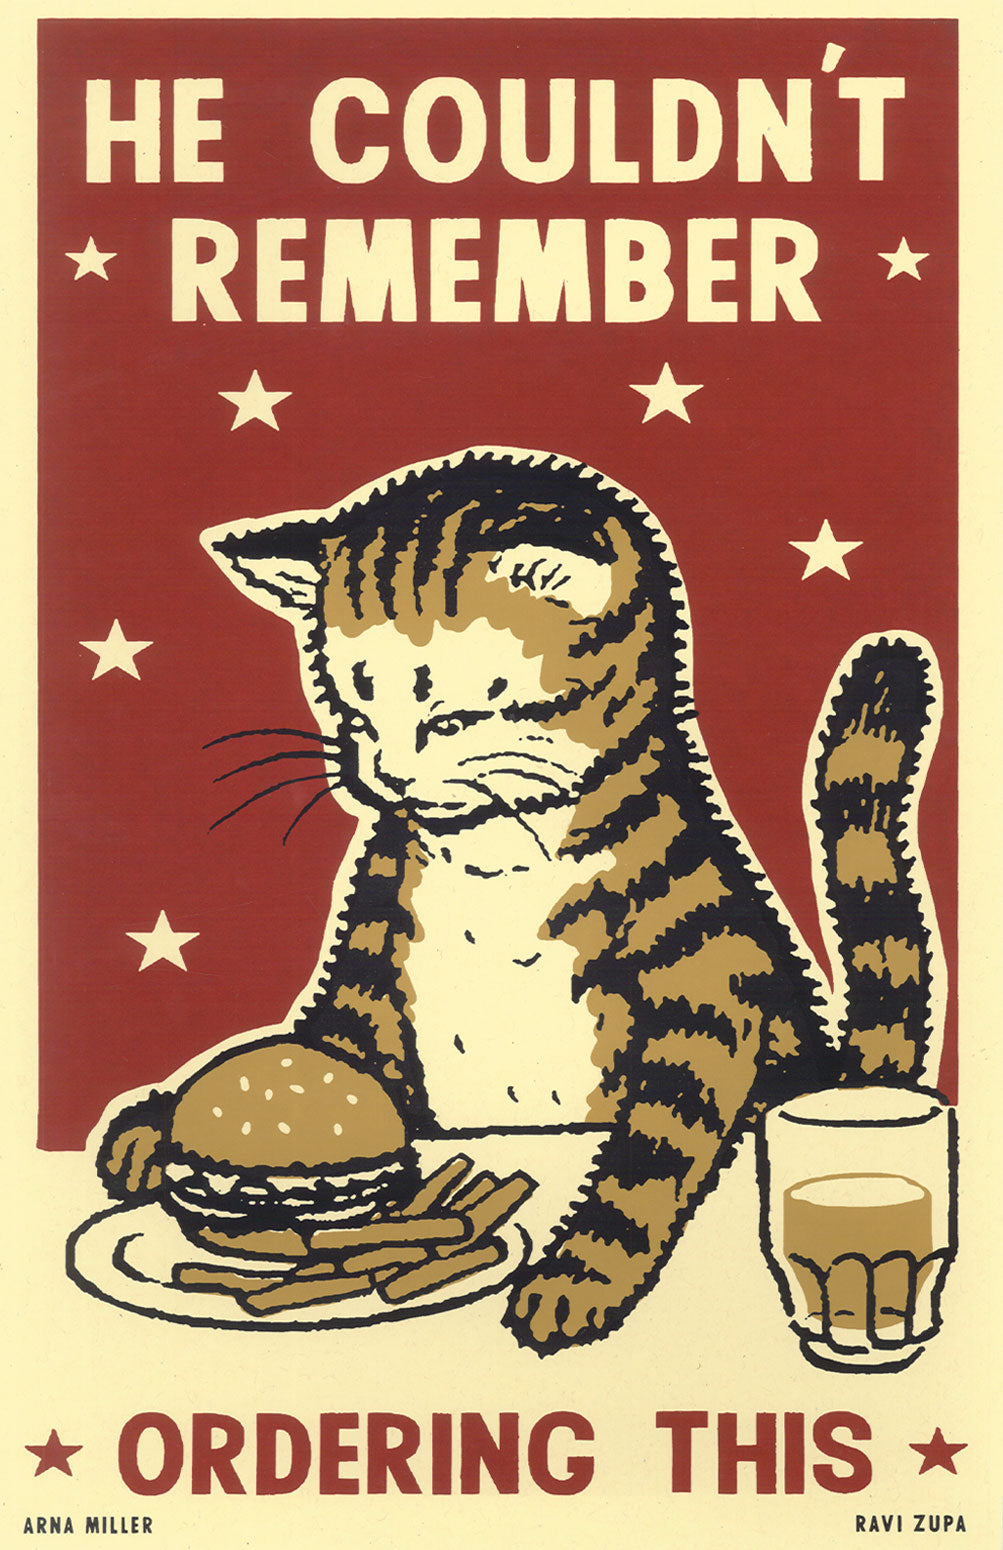 Drunk Cat Series Print - He Couldn't Remember Ordering This - By Arna Miller and Ravi Zupa